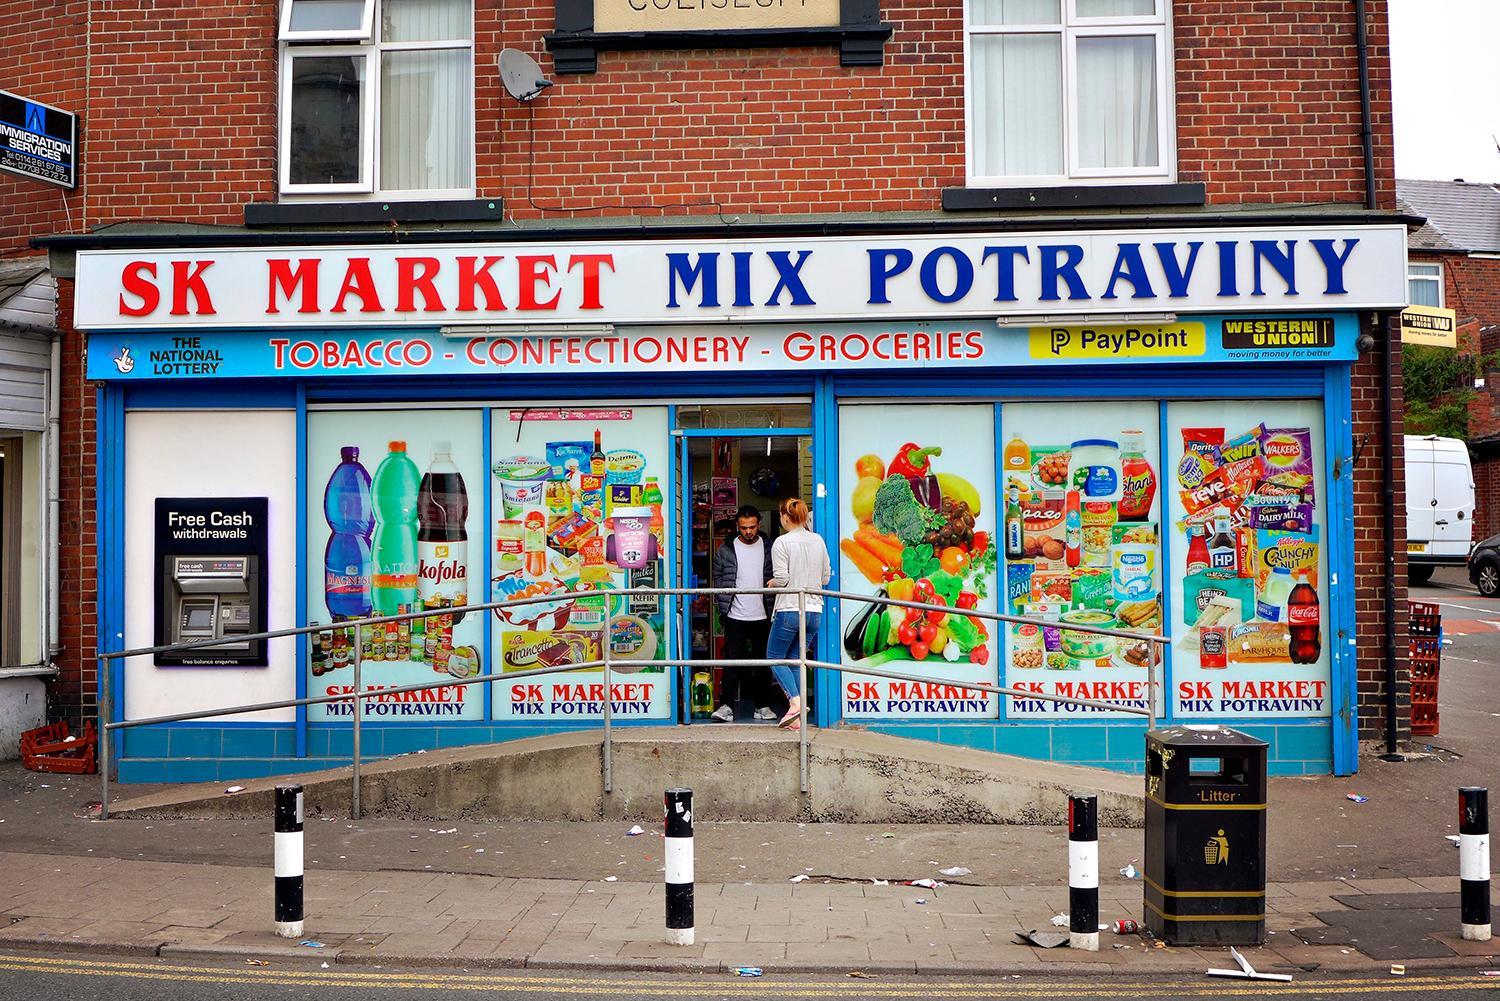 A grocery shop with Slovak products in the heart of Page Hall area in Sheffield.